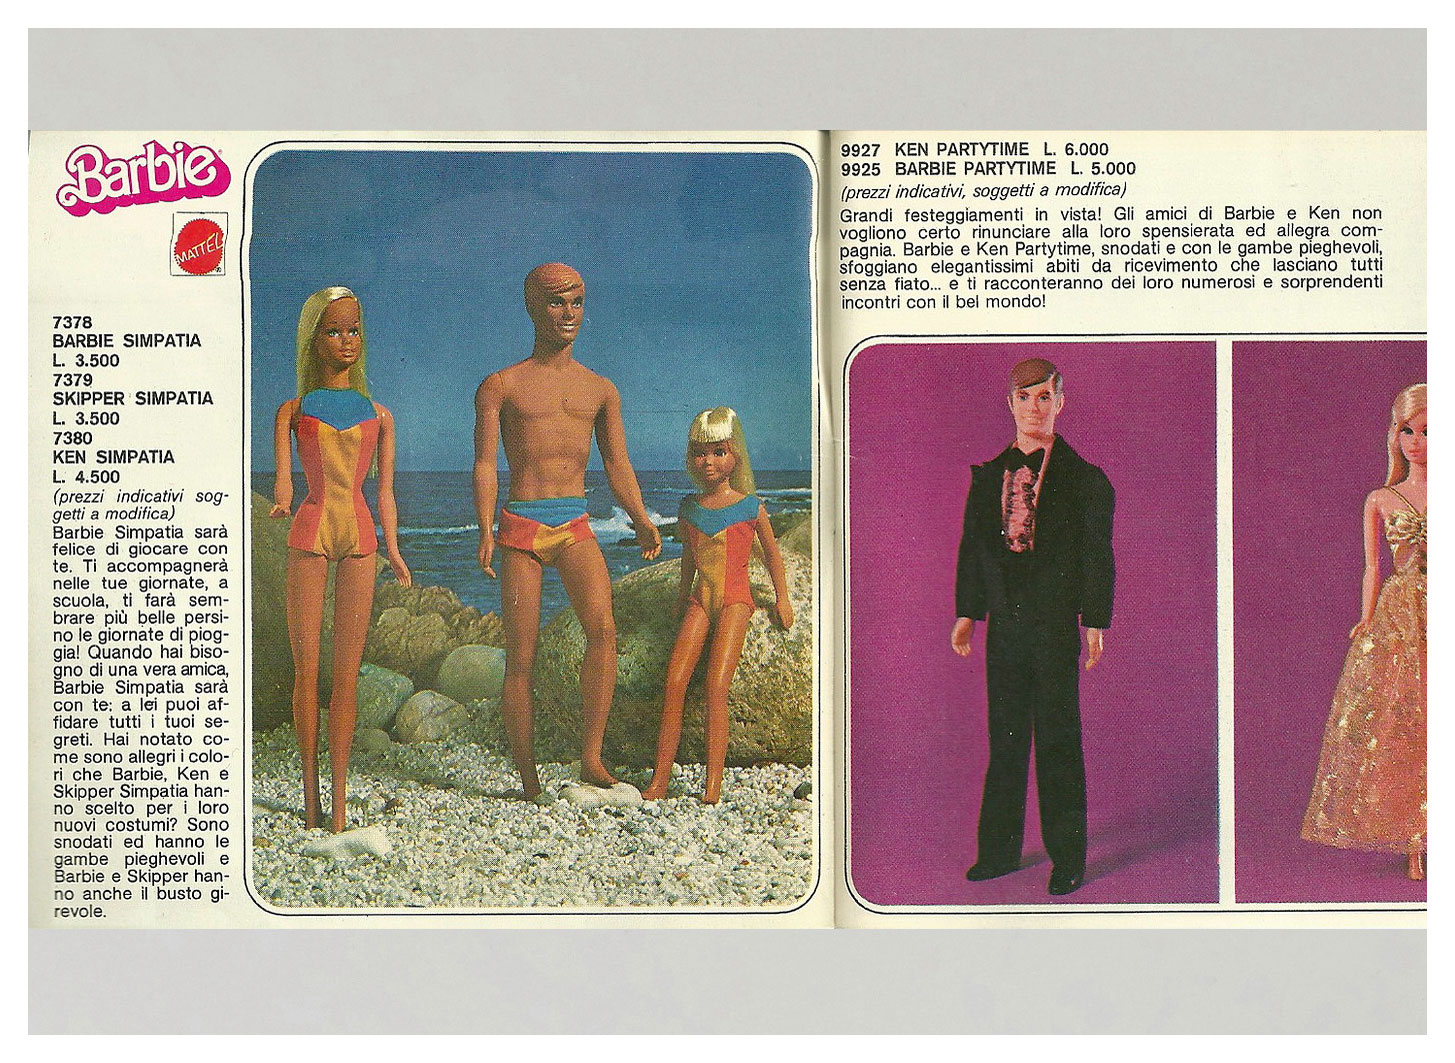 From 1977 Italian Barbie booklet